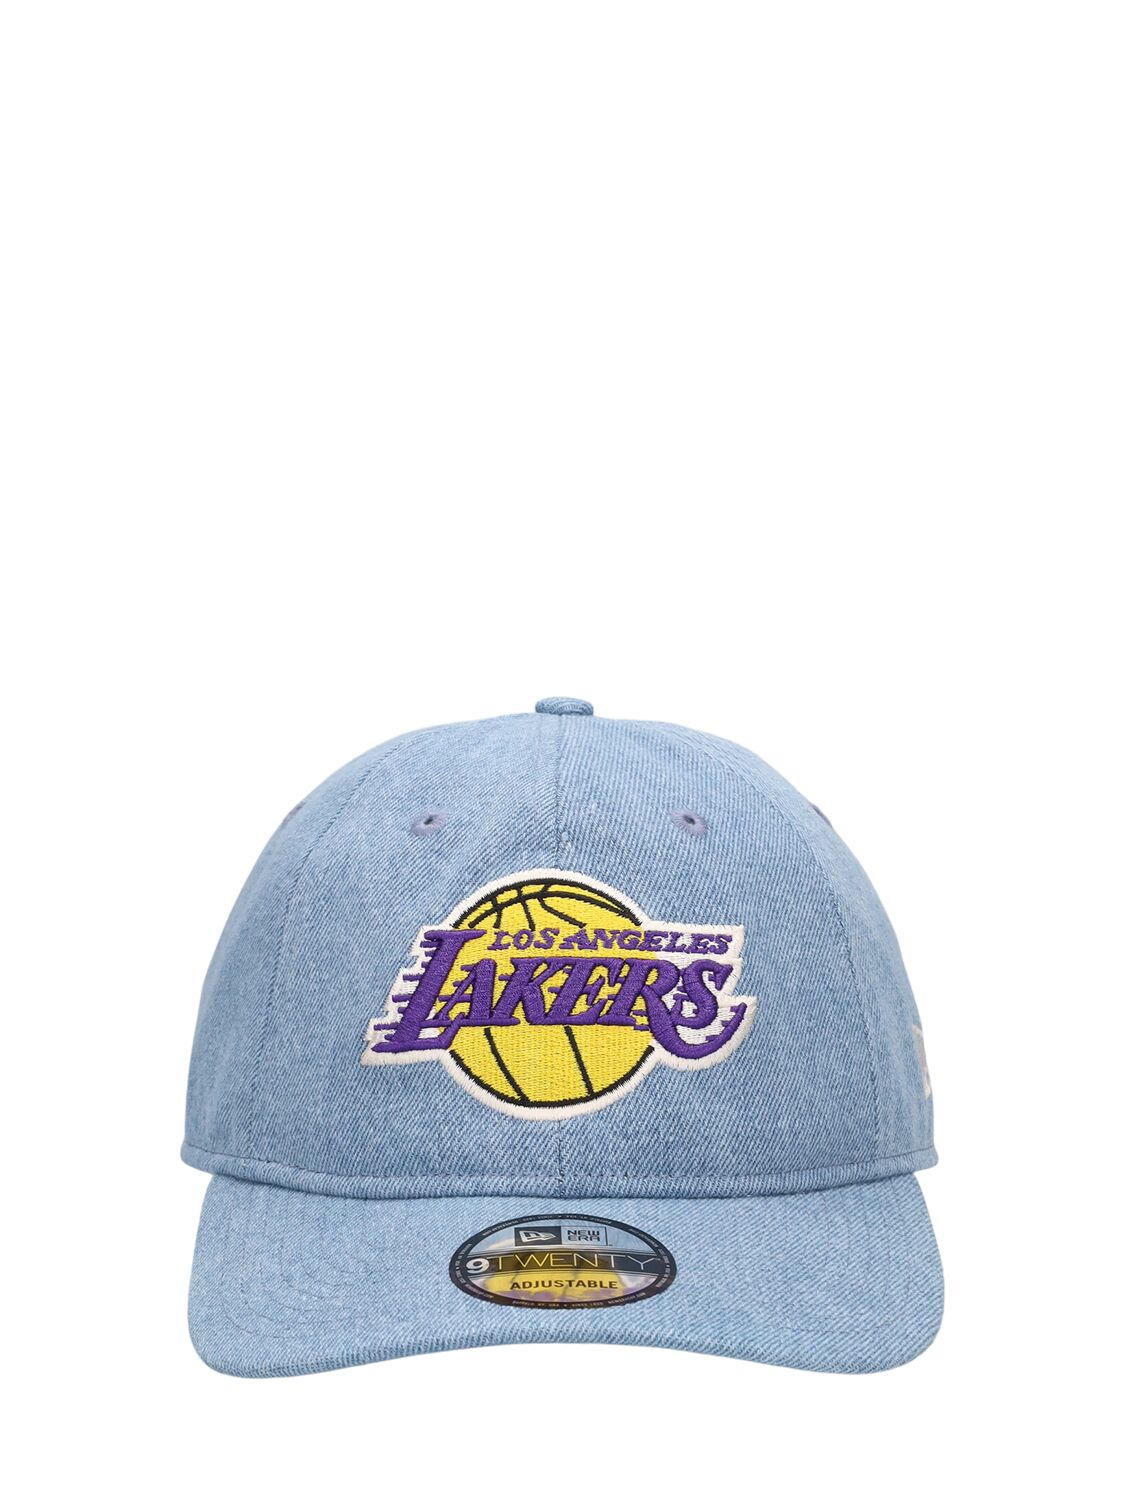 New Era Washed Denim Los Angeles Lakers棒球帽 In Washed Denim